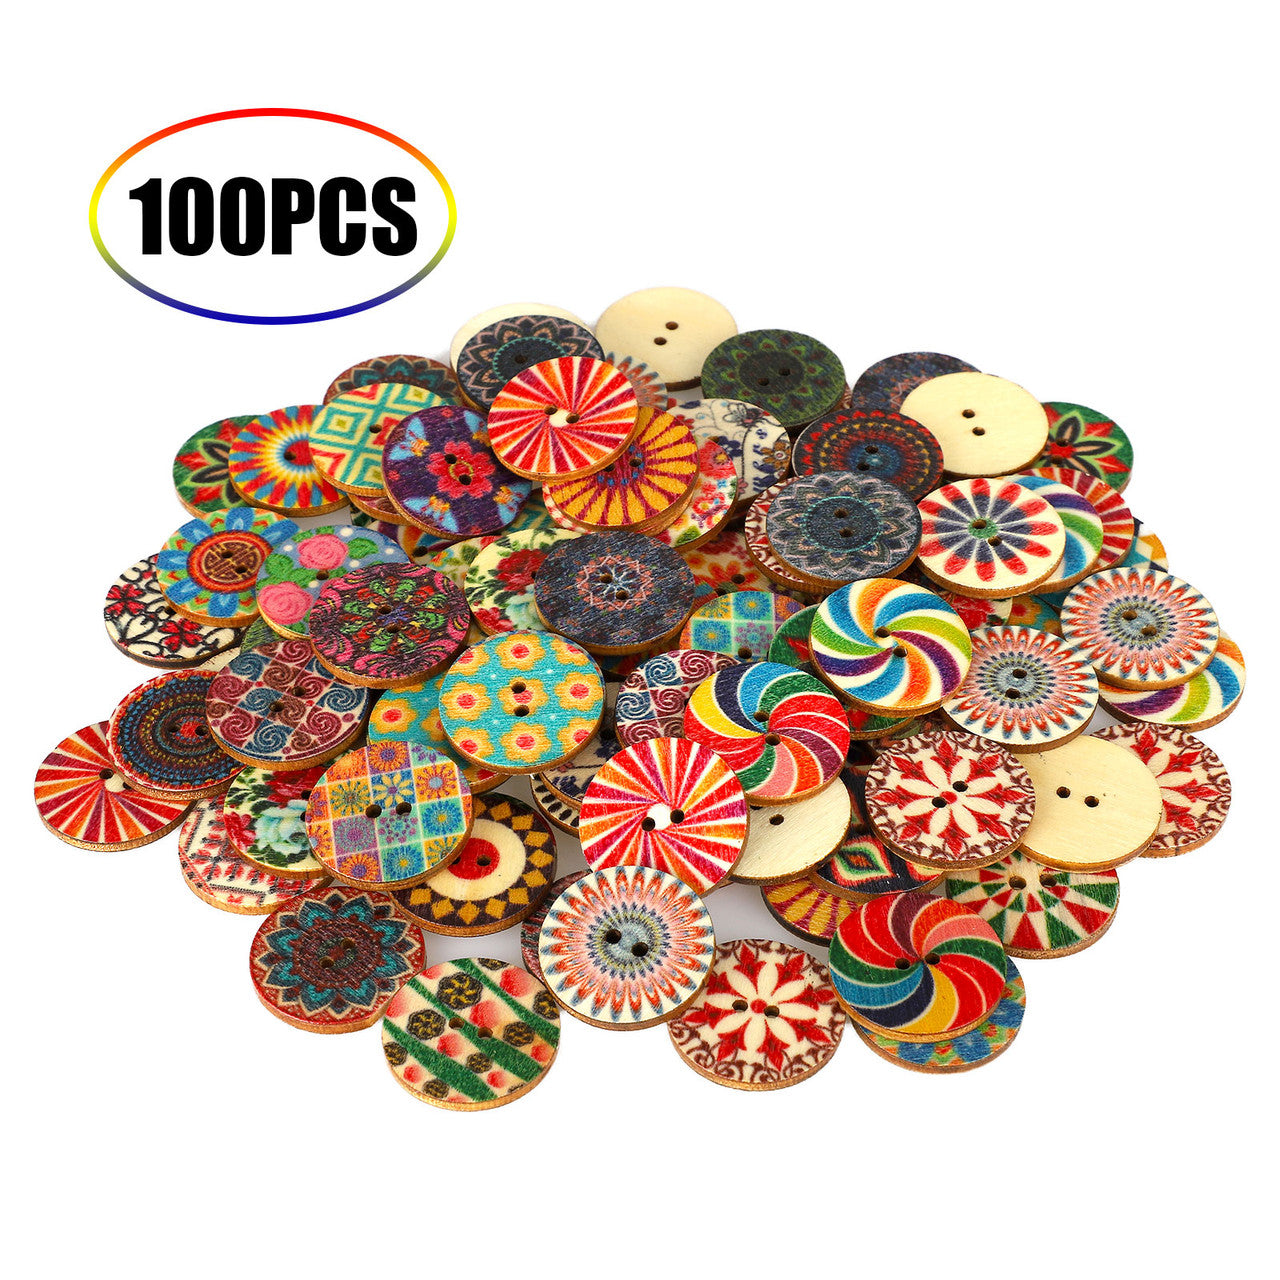 Wooden Buttons, Mixed 2 Holes Buttons 1 Inch Round Wood Buttons Vintage Assorted Random Color Flower Painting Buttons Decorative Buttons for DIY Sewing Crafting Decoration, 100pcs